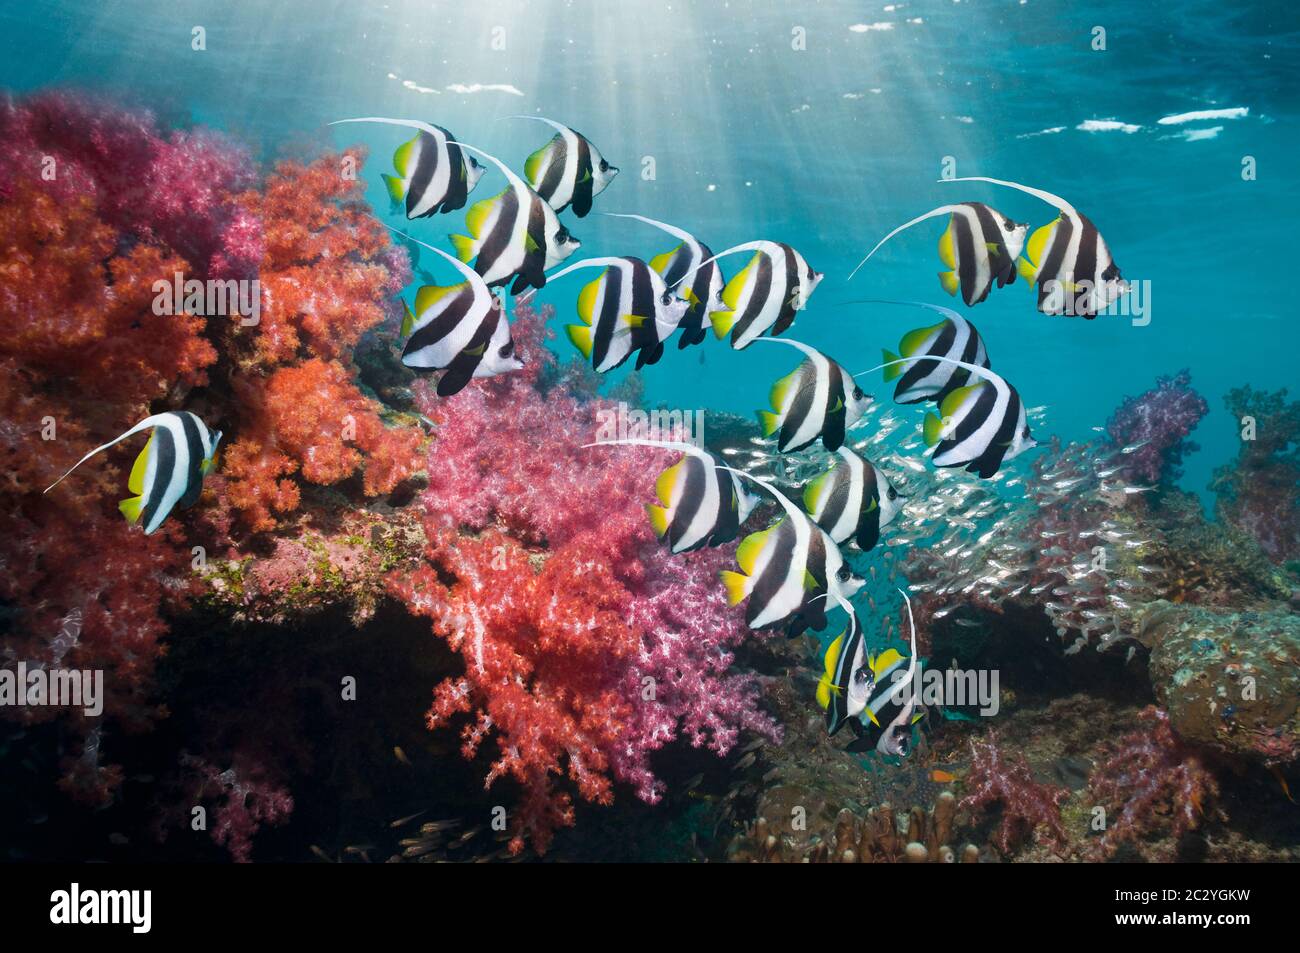 Schooling bannerfish [Heniochus diphreutes] swimming over soft corals.  Indonesia. Stock Photo